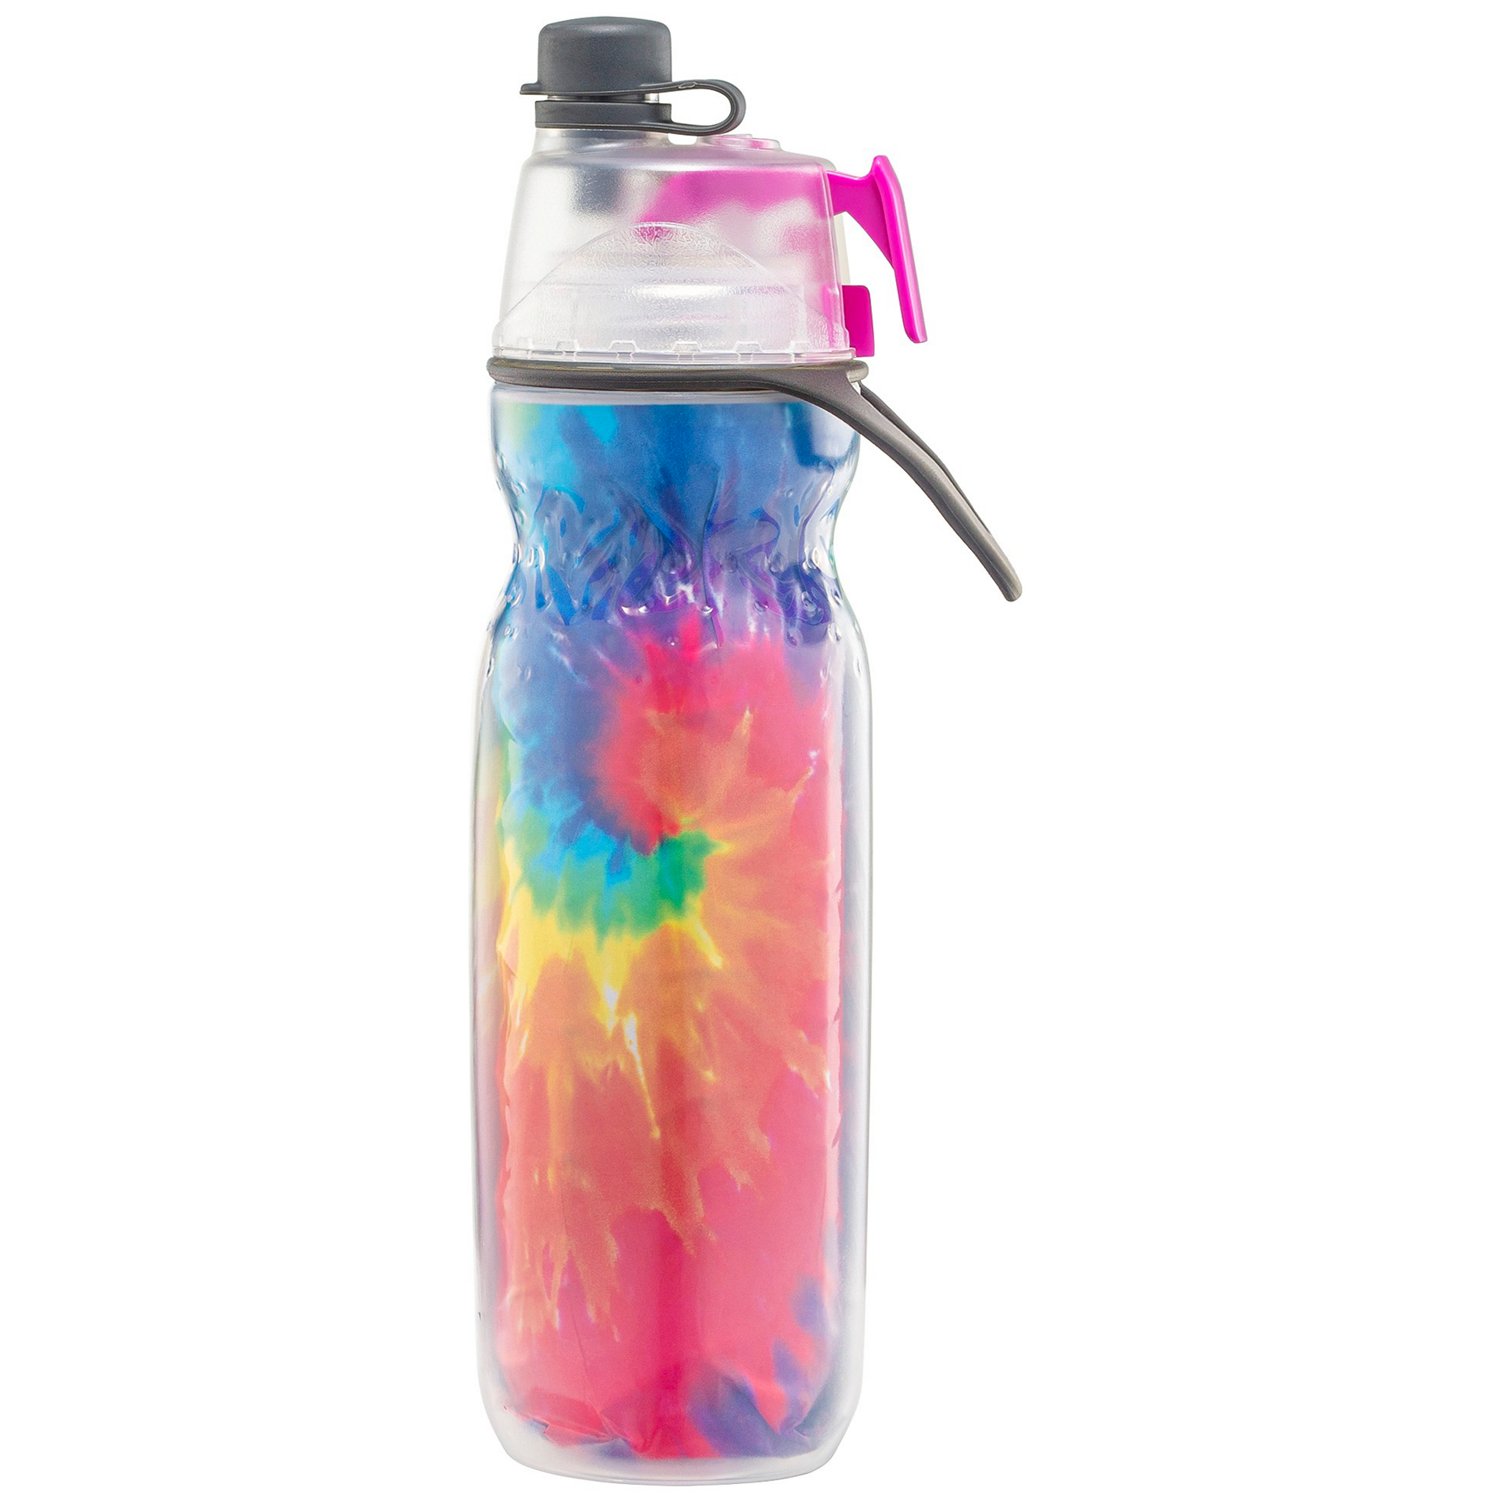 O2COOL Mist N' Sip® Water Bottle for Drinking and Misting